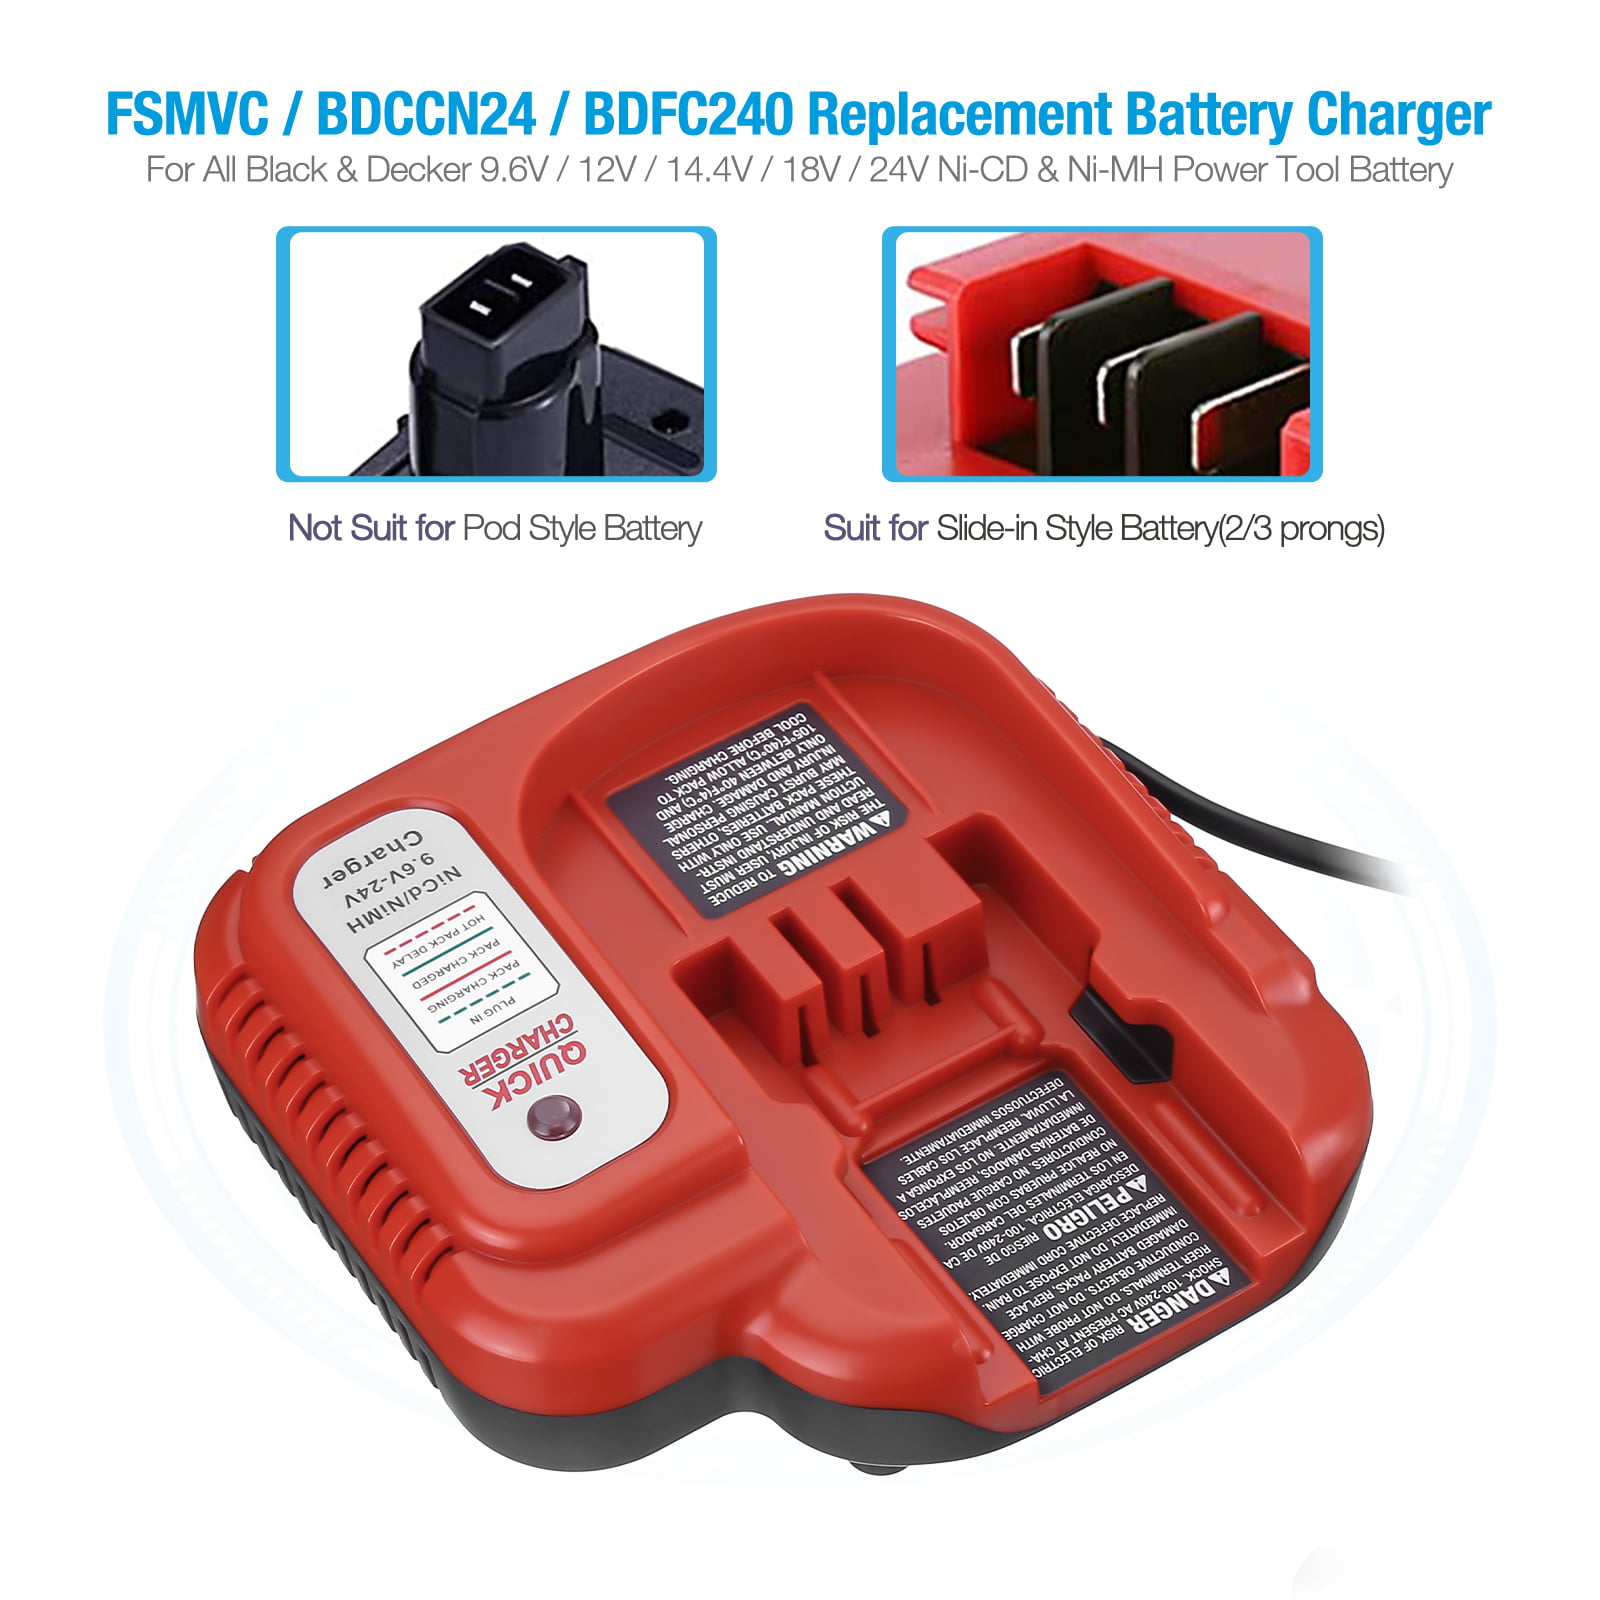 1pc For Black & Decker 9.6V-18V Ni-Cd&Ni-MH Battery Charger Replacement Fit  Firestorm FS120B FS120BX A1718 Power Tool Charger - AliExpress